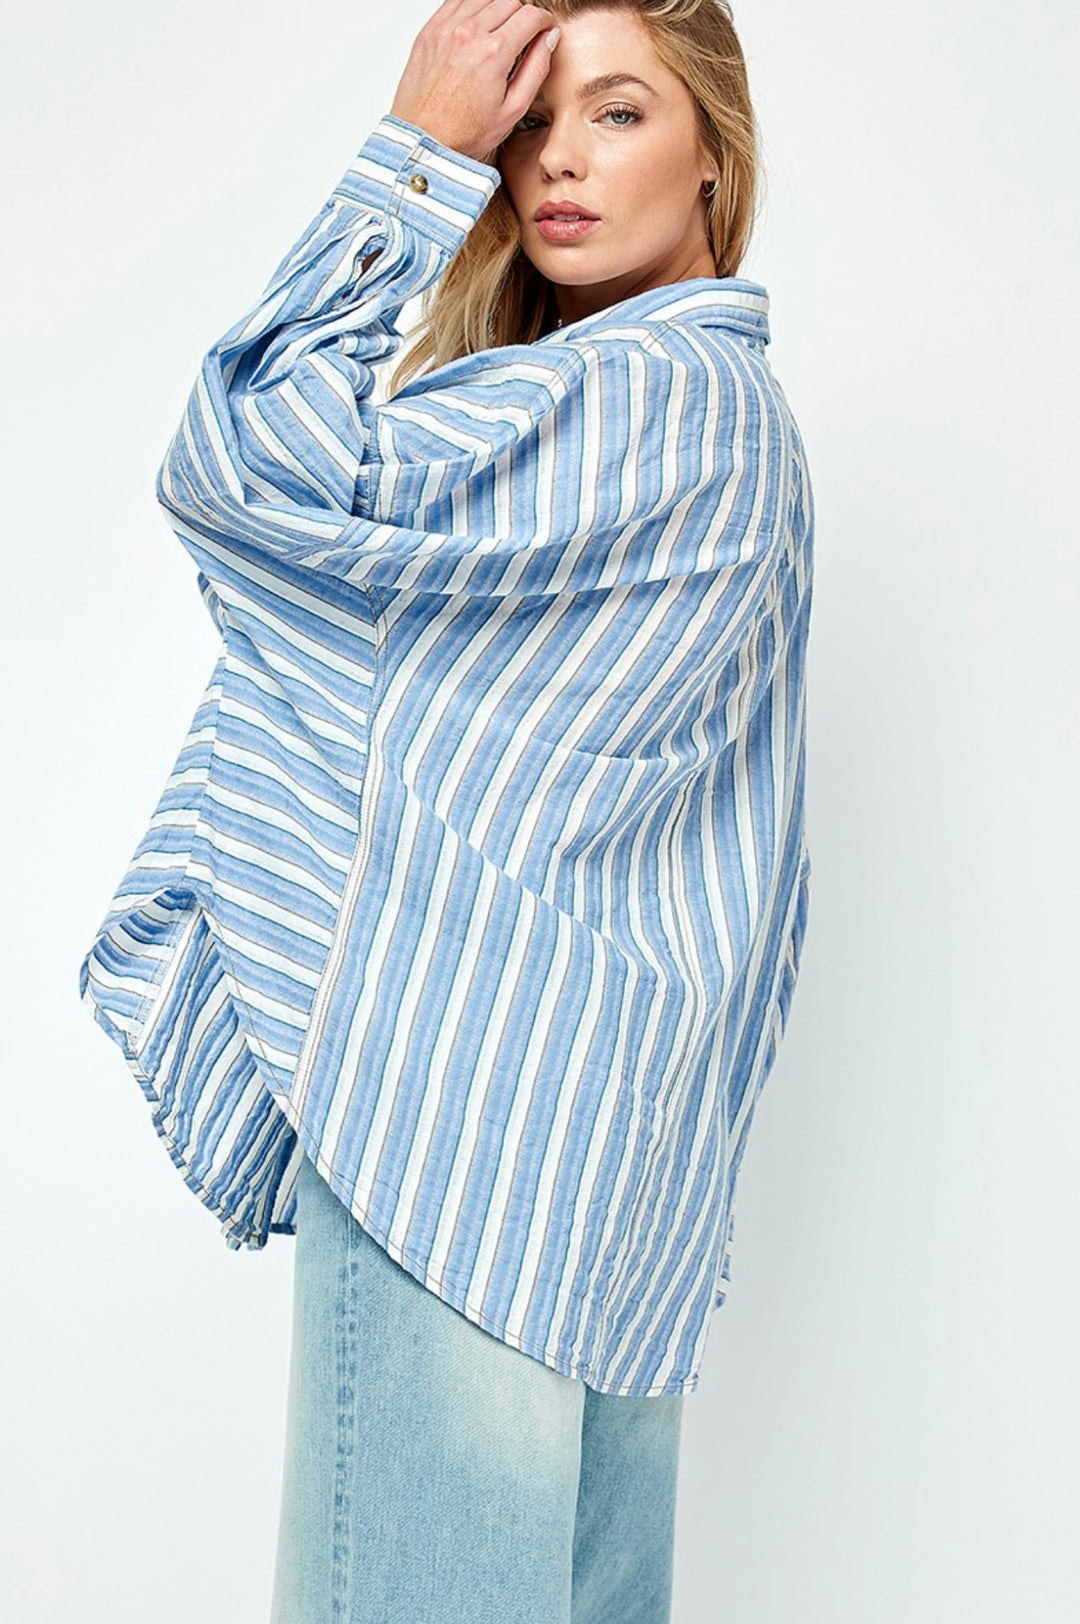 Striped Button down Top with Contrast Blue and White